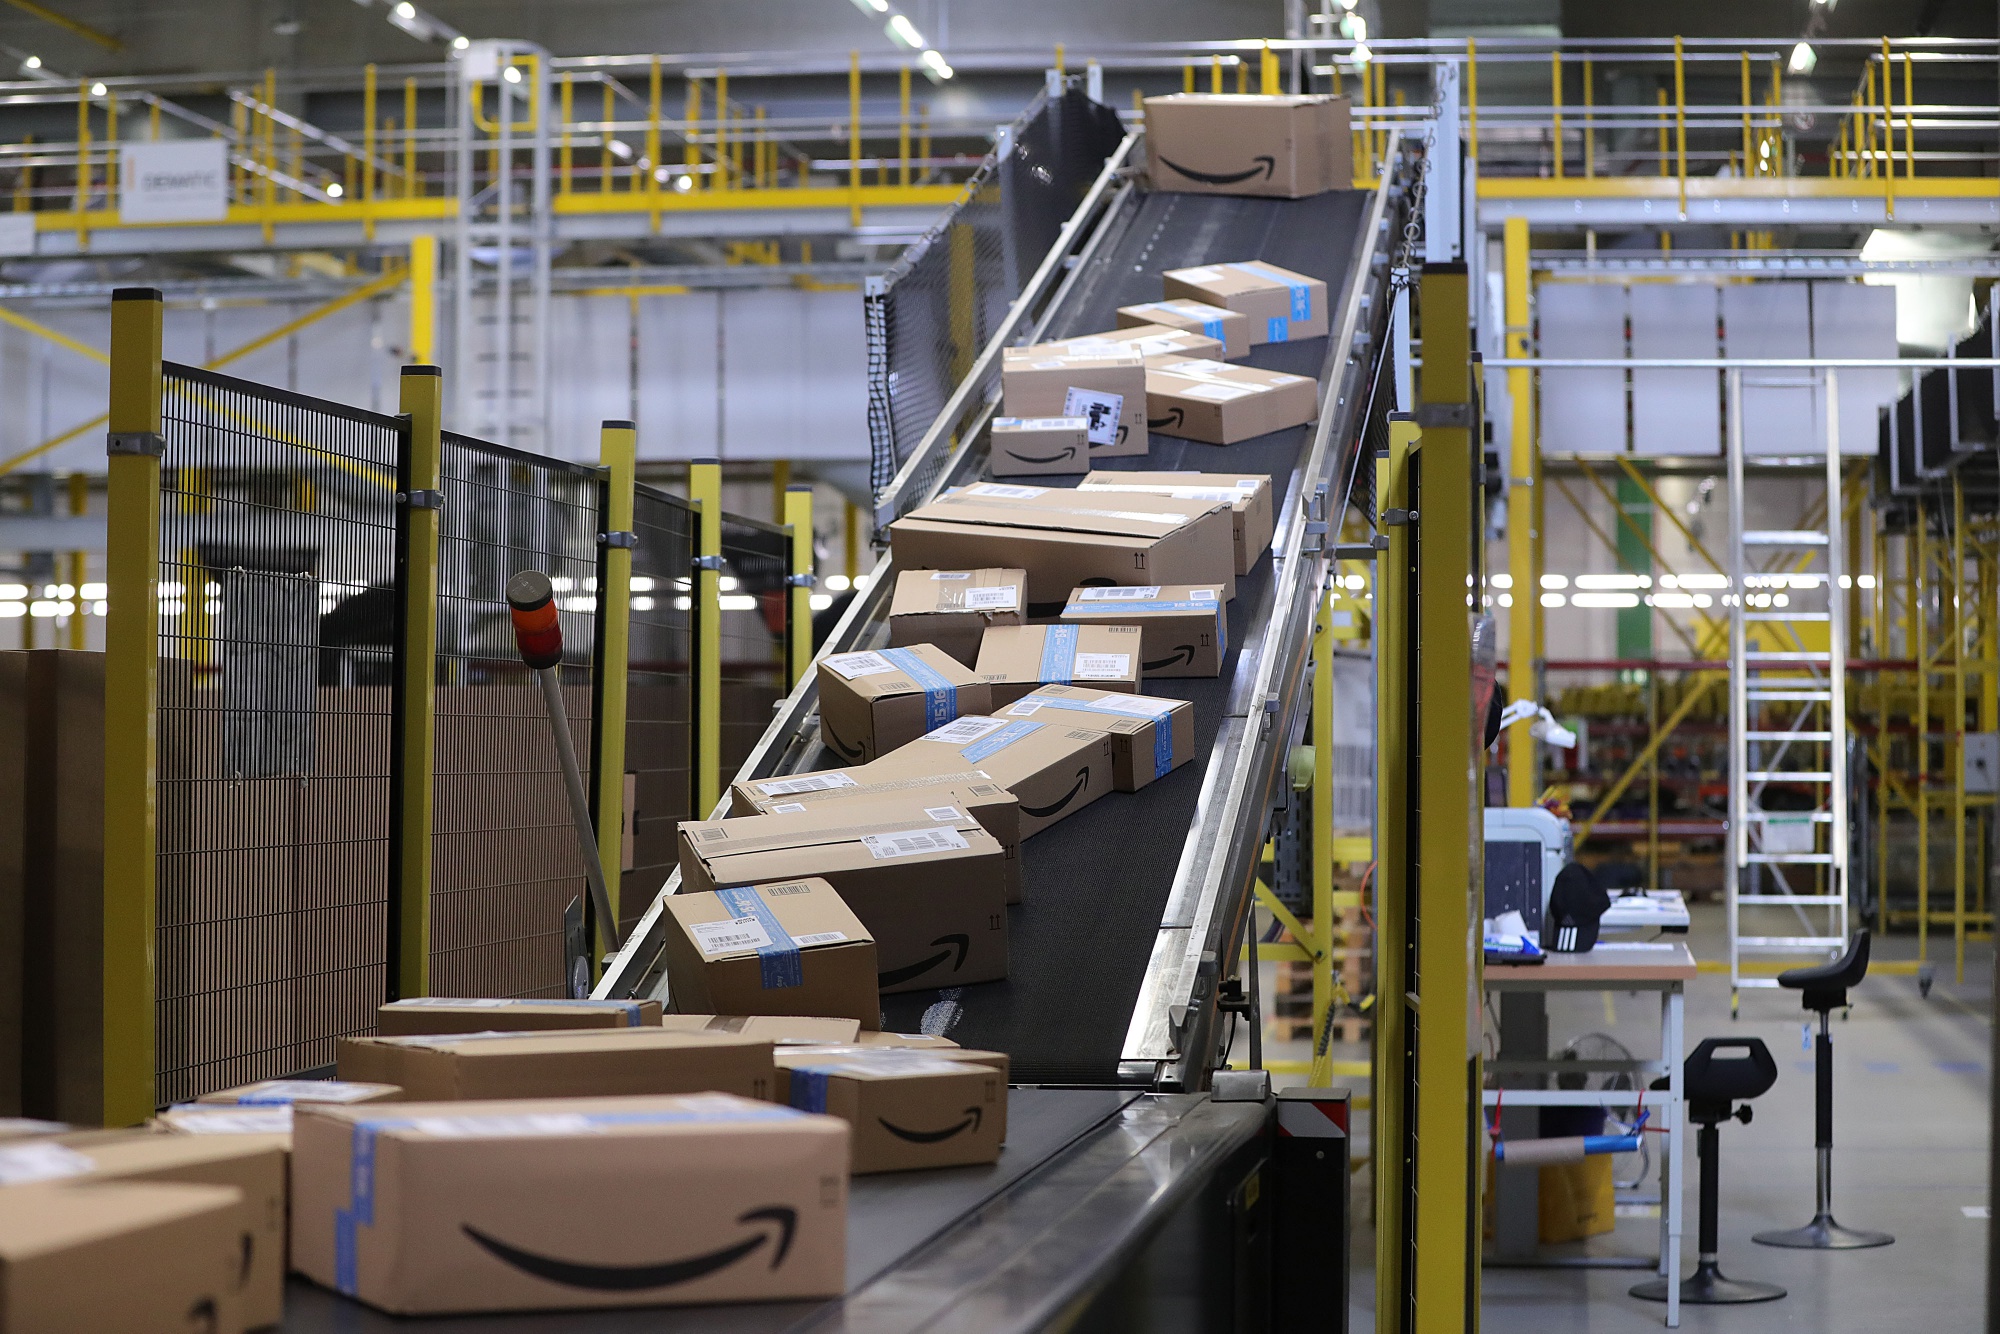 Prime Day: What it's like for fulfillment center workers.